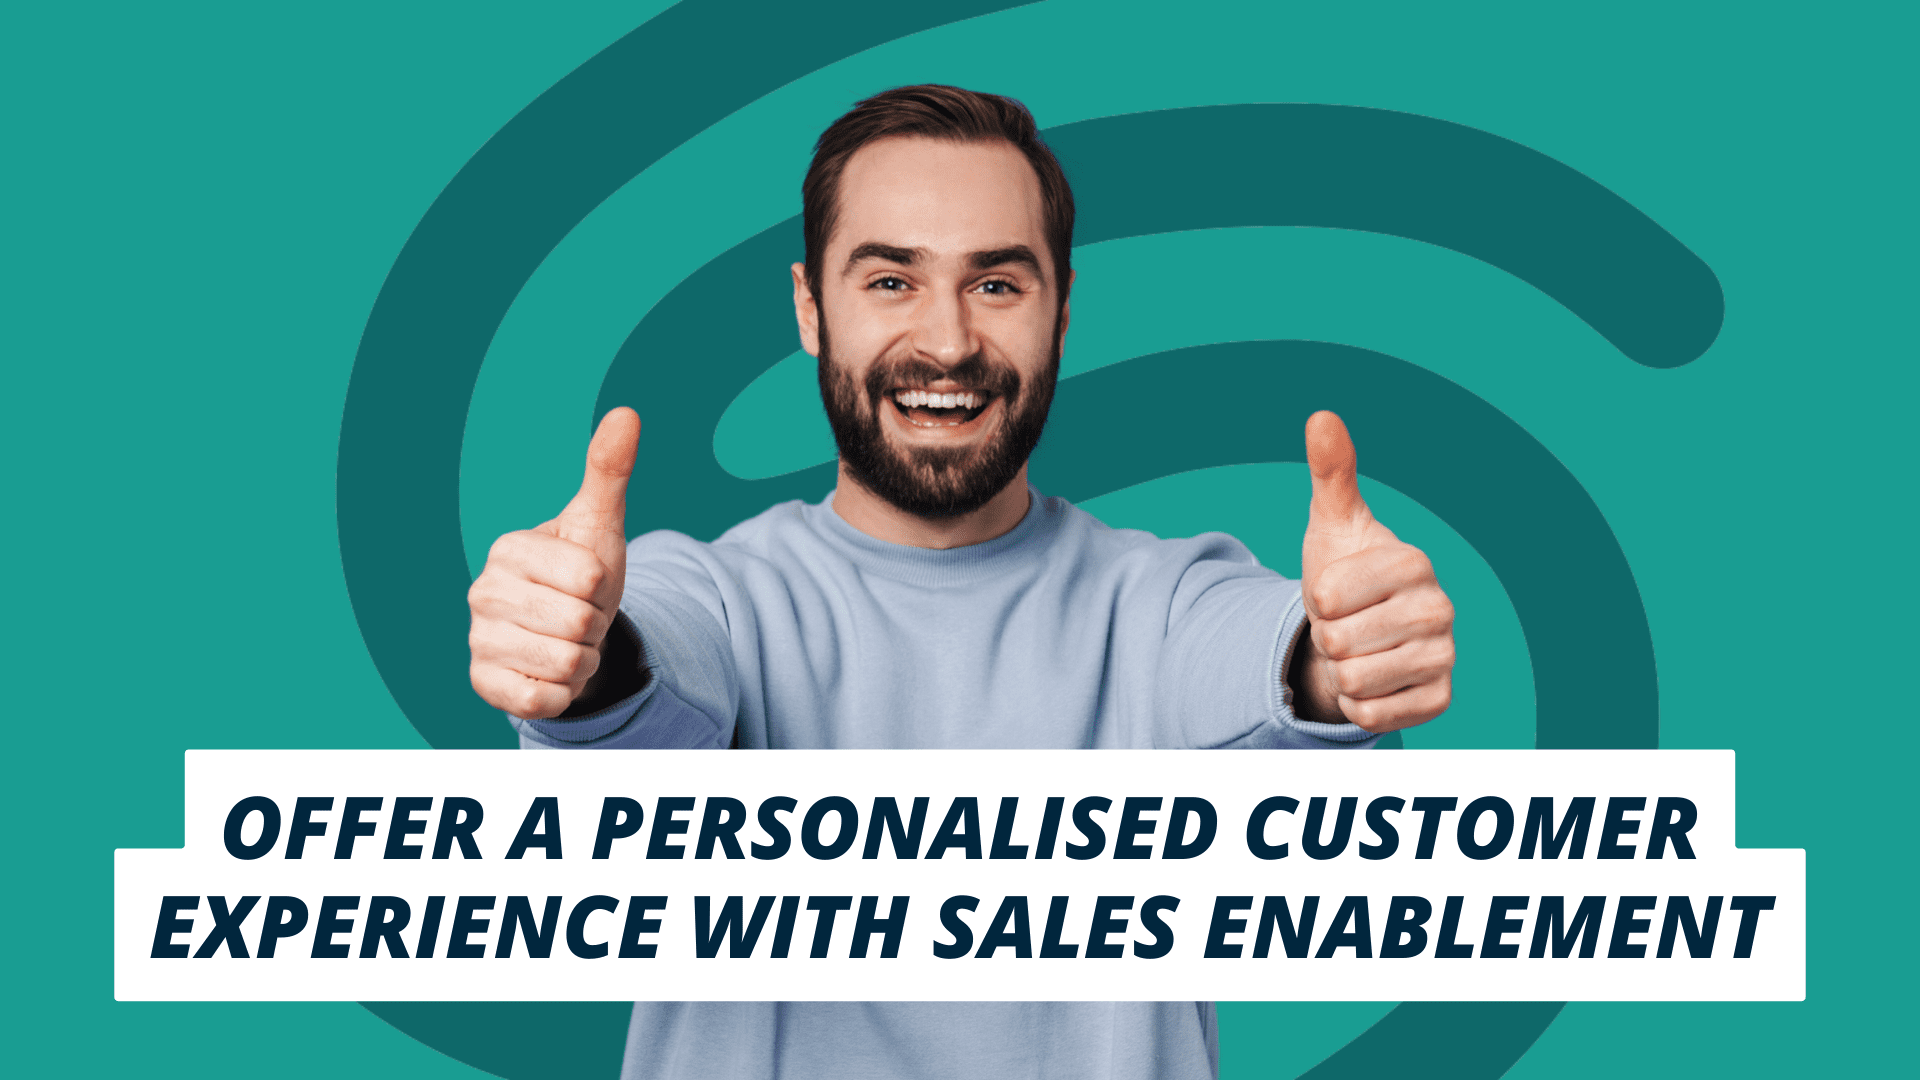 Offer a personalized customer experience with Sales Enablement